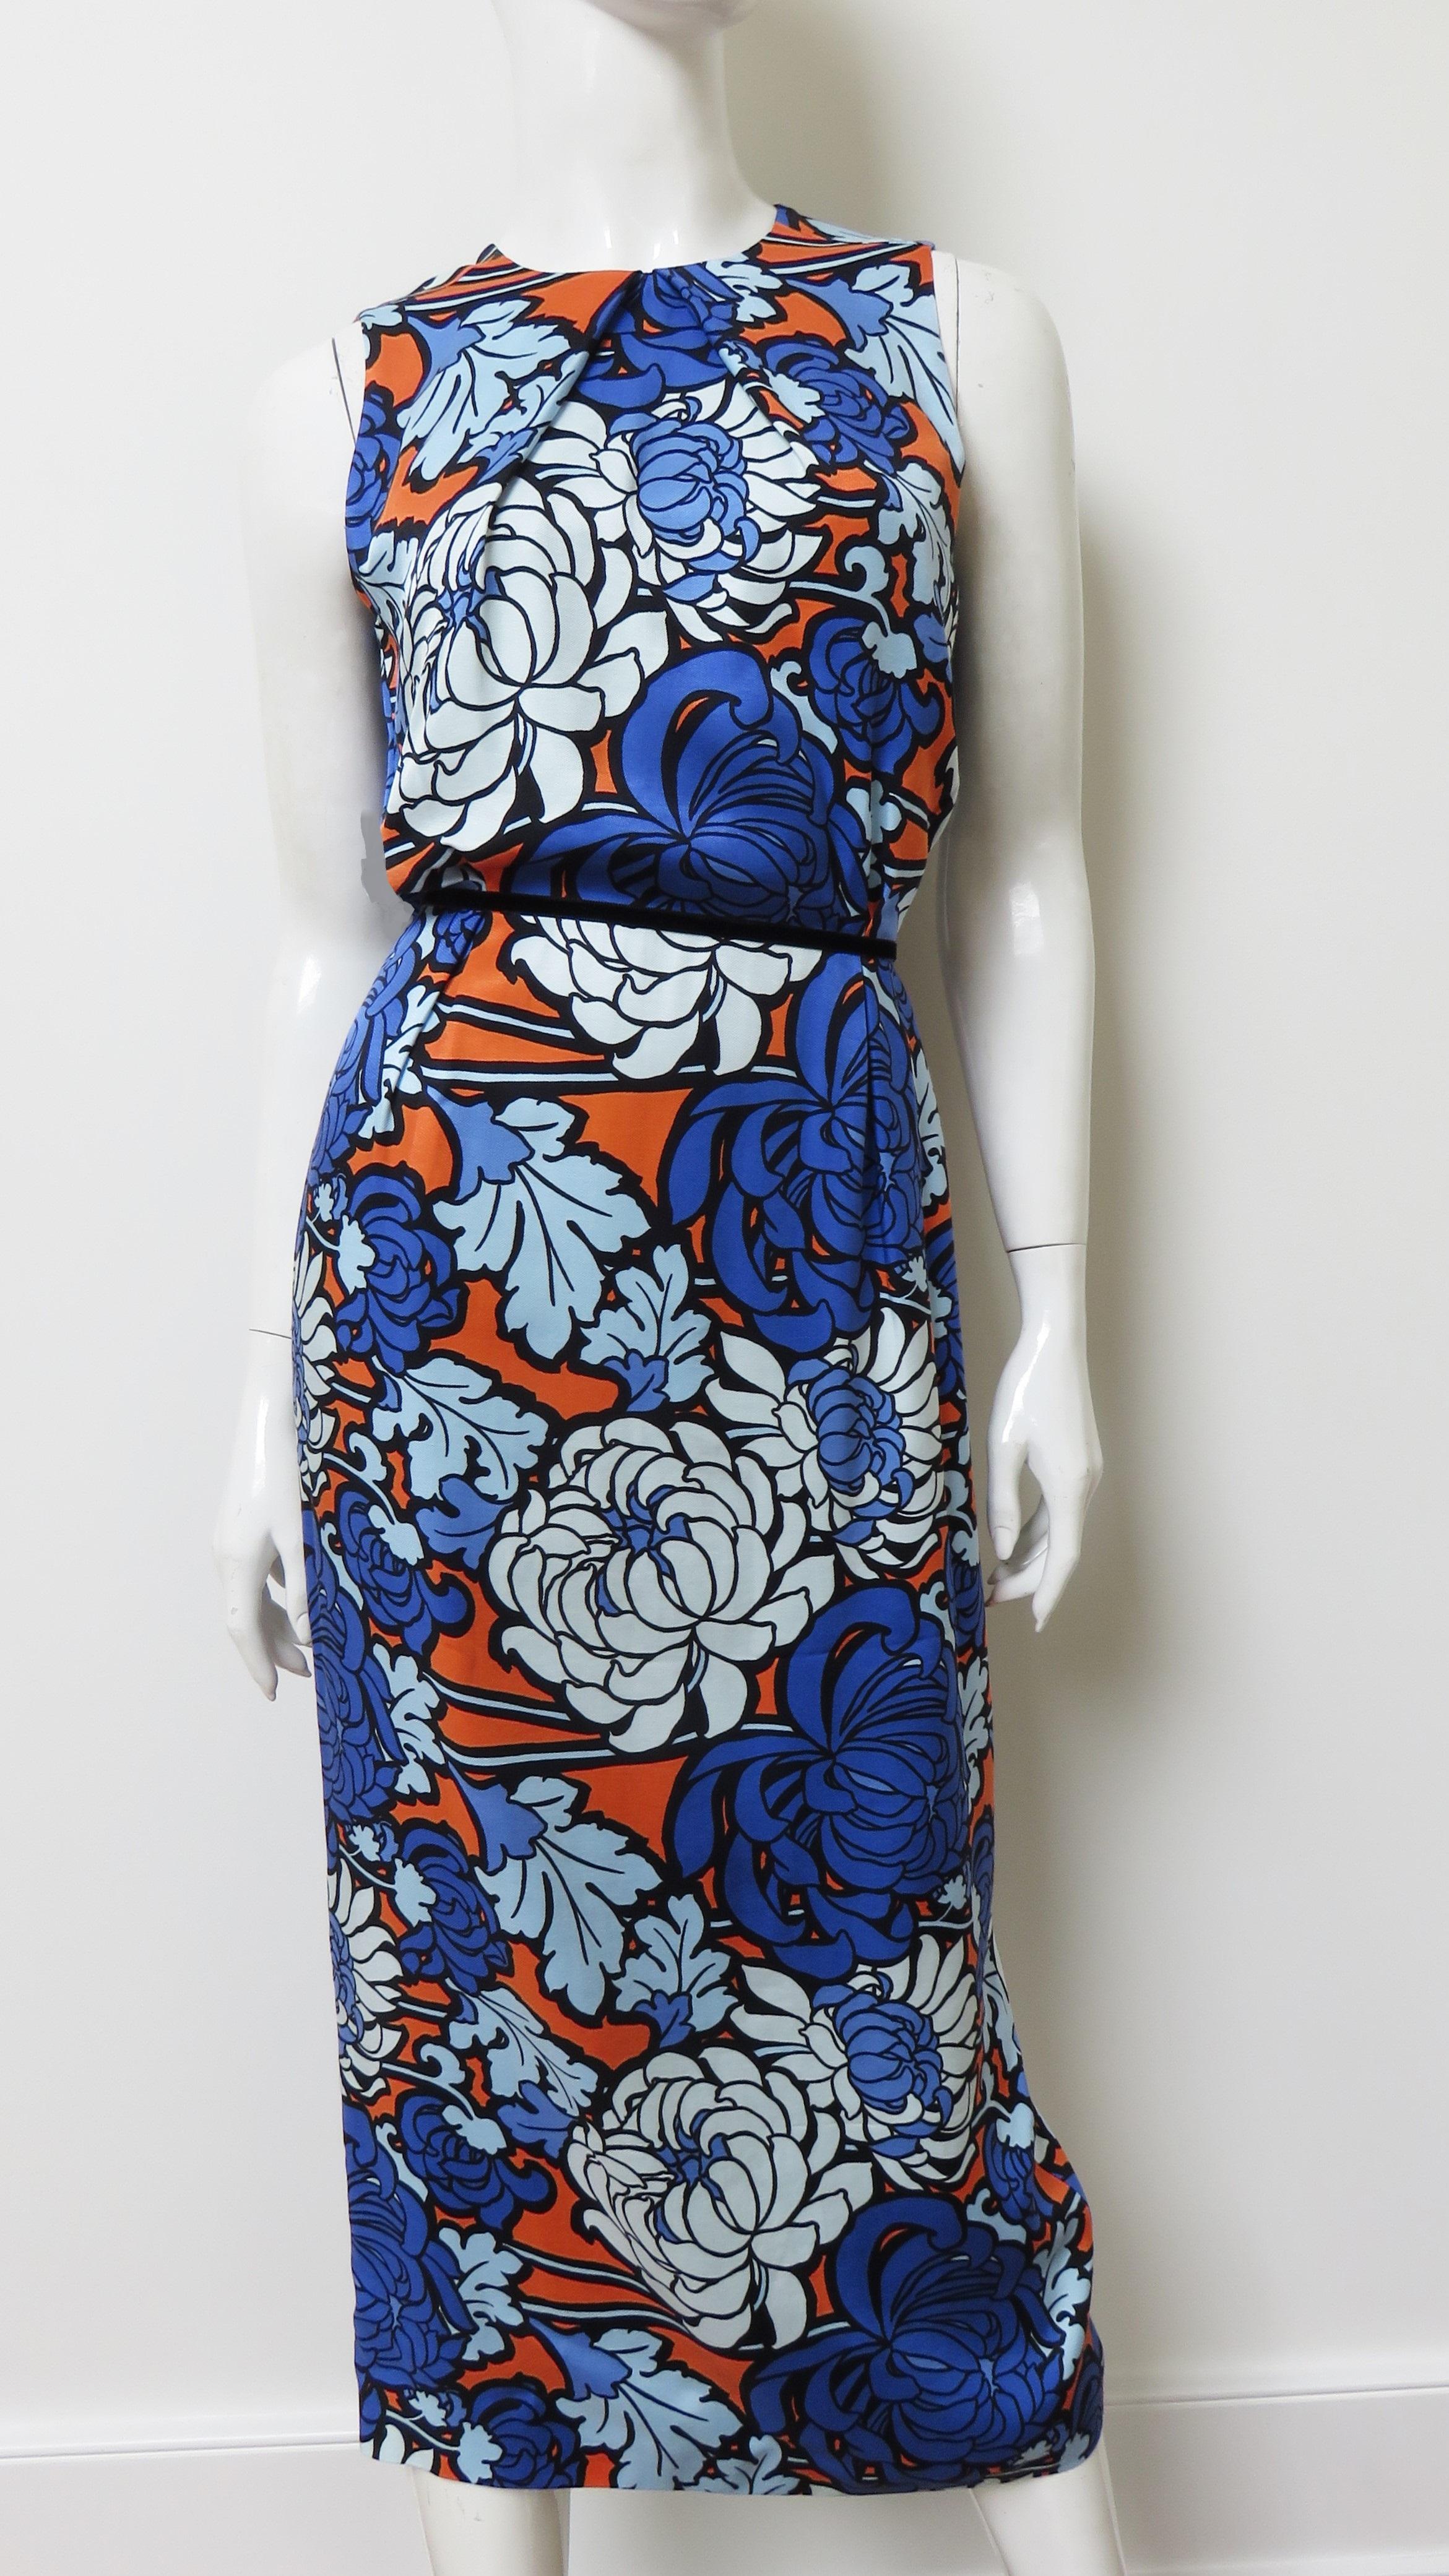 Gucci Silk Flower Print Midi Dress SS 2018 In Excellent Condition For Sale In Water Mill, NY